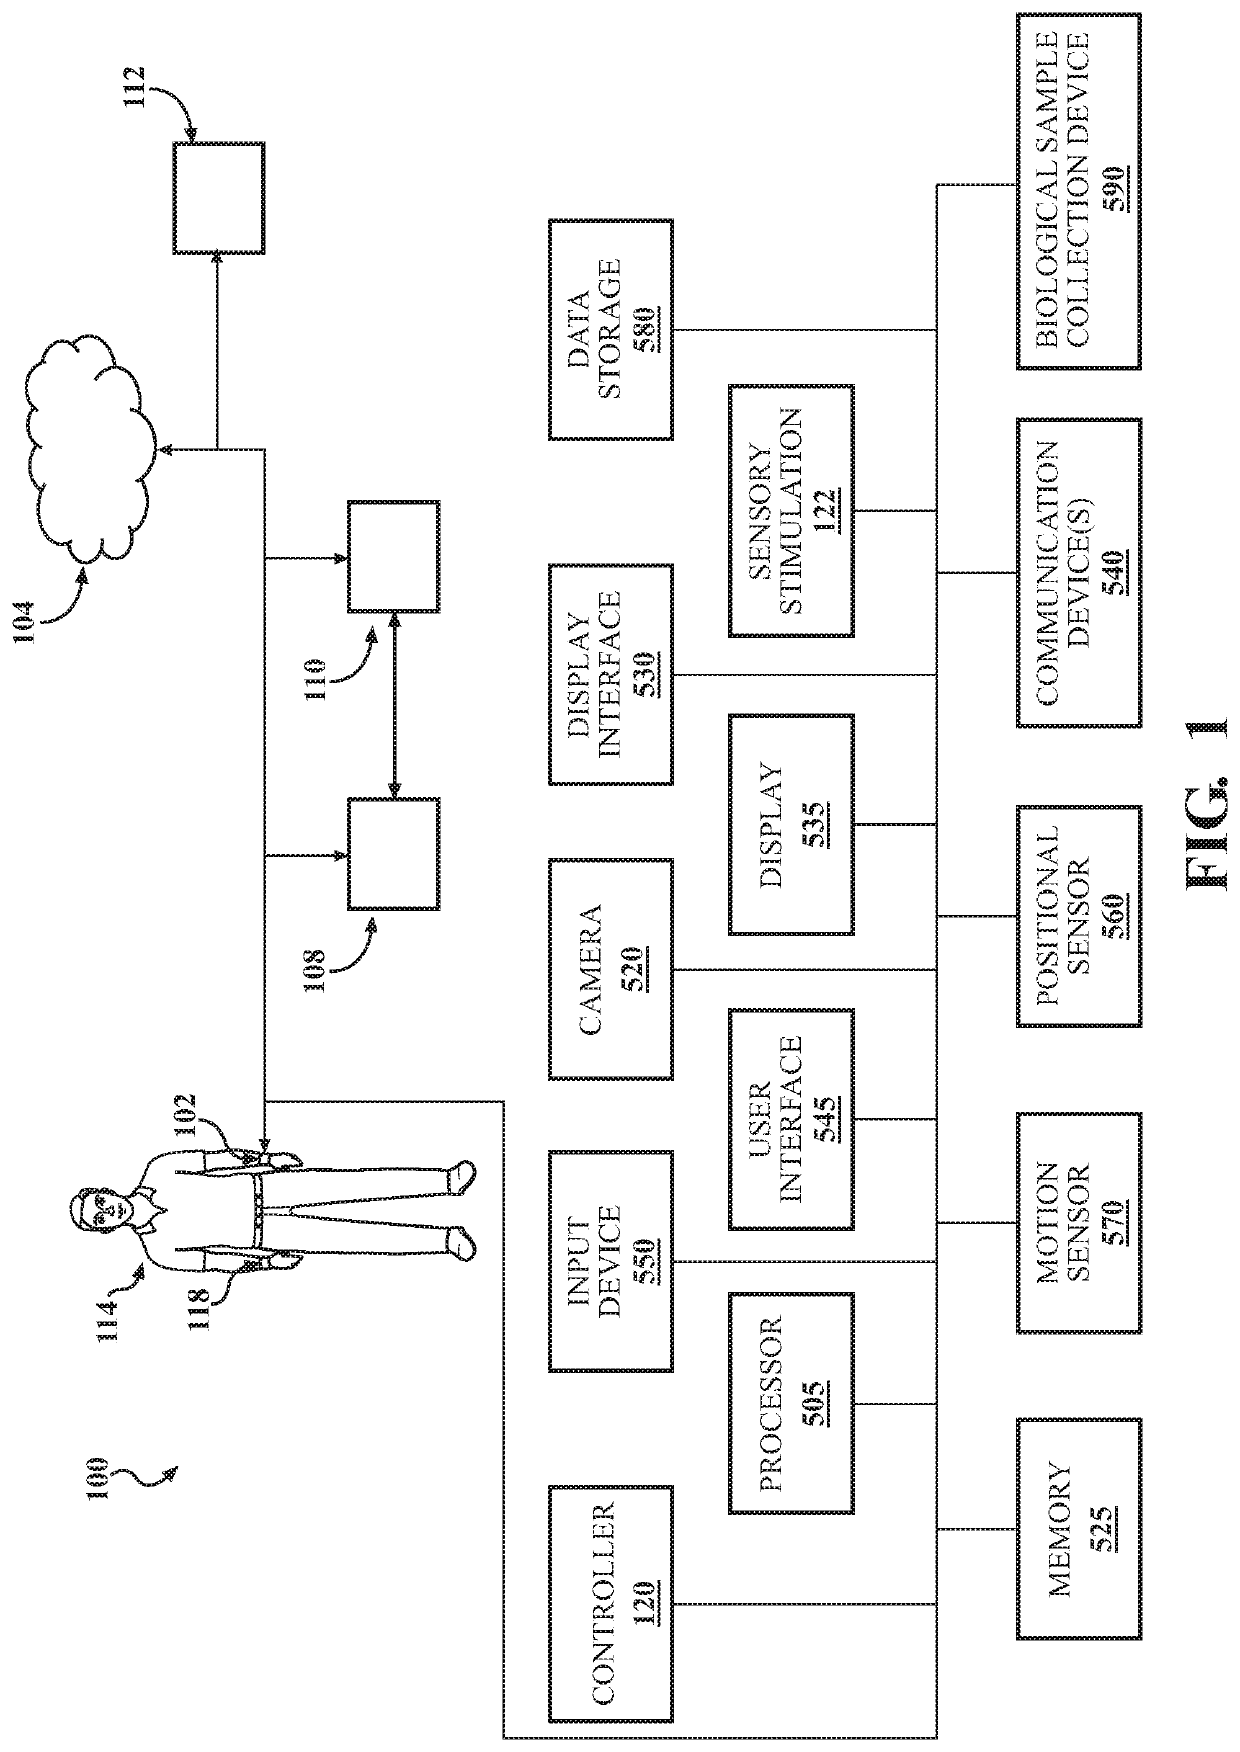 Systems and methods of mitigating negative effects of therapies with transcutaneous vibration